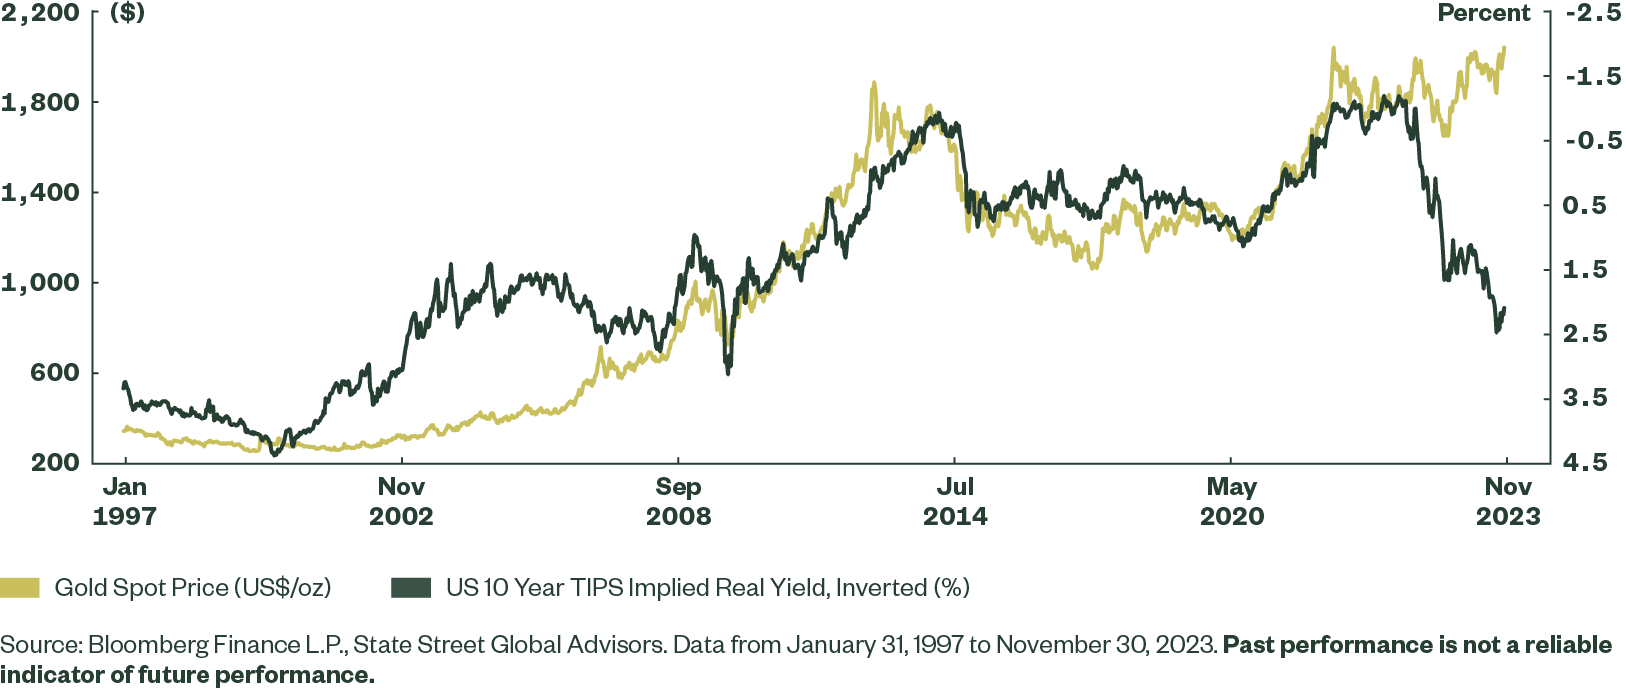 Figure 2: Traditional Inverse Relationship Between Gold and Market-implied Real Yields Broke Down in 2023 